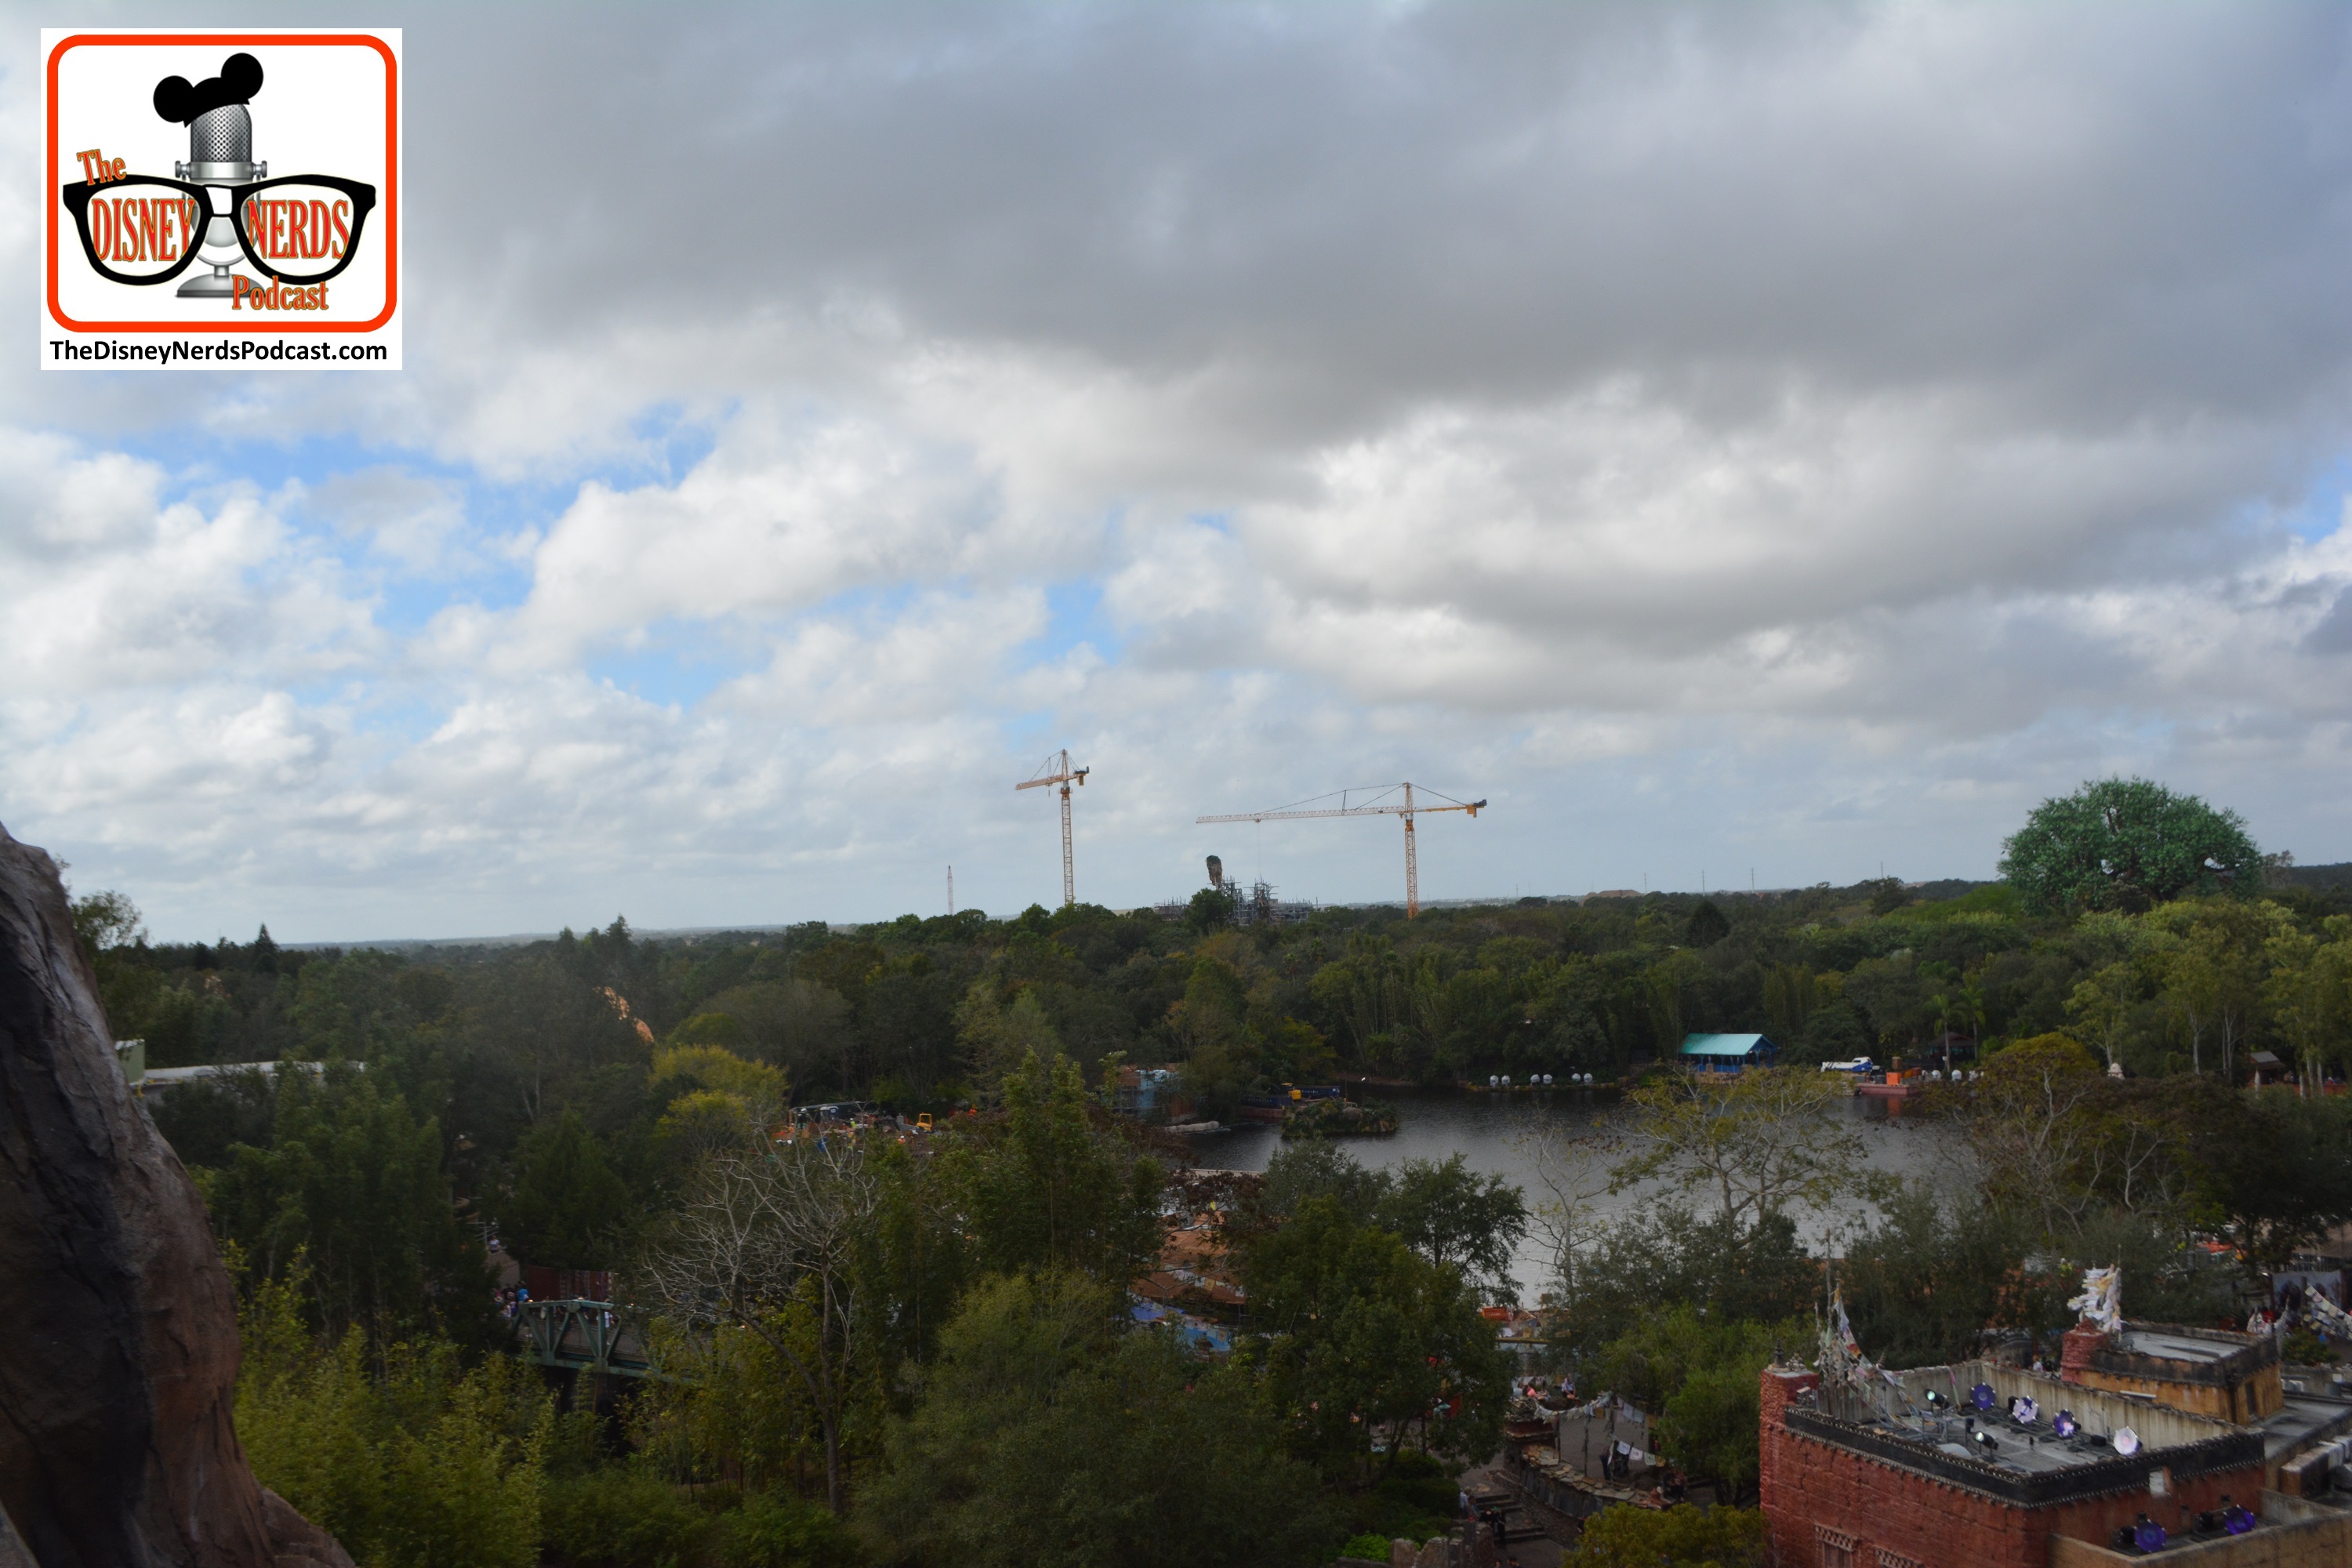 2015-12 - Animal Kingdom - Pandora The World Of Avatar construction as seen from the drop hill of Everest. You an see the first "floating island"